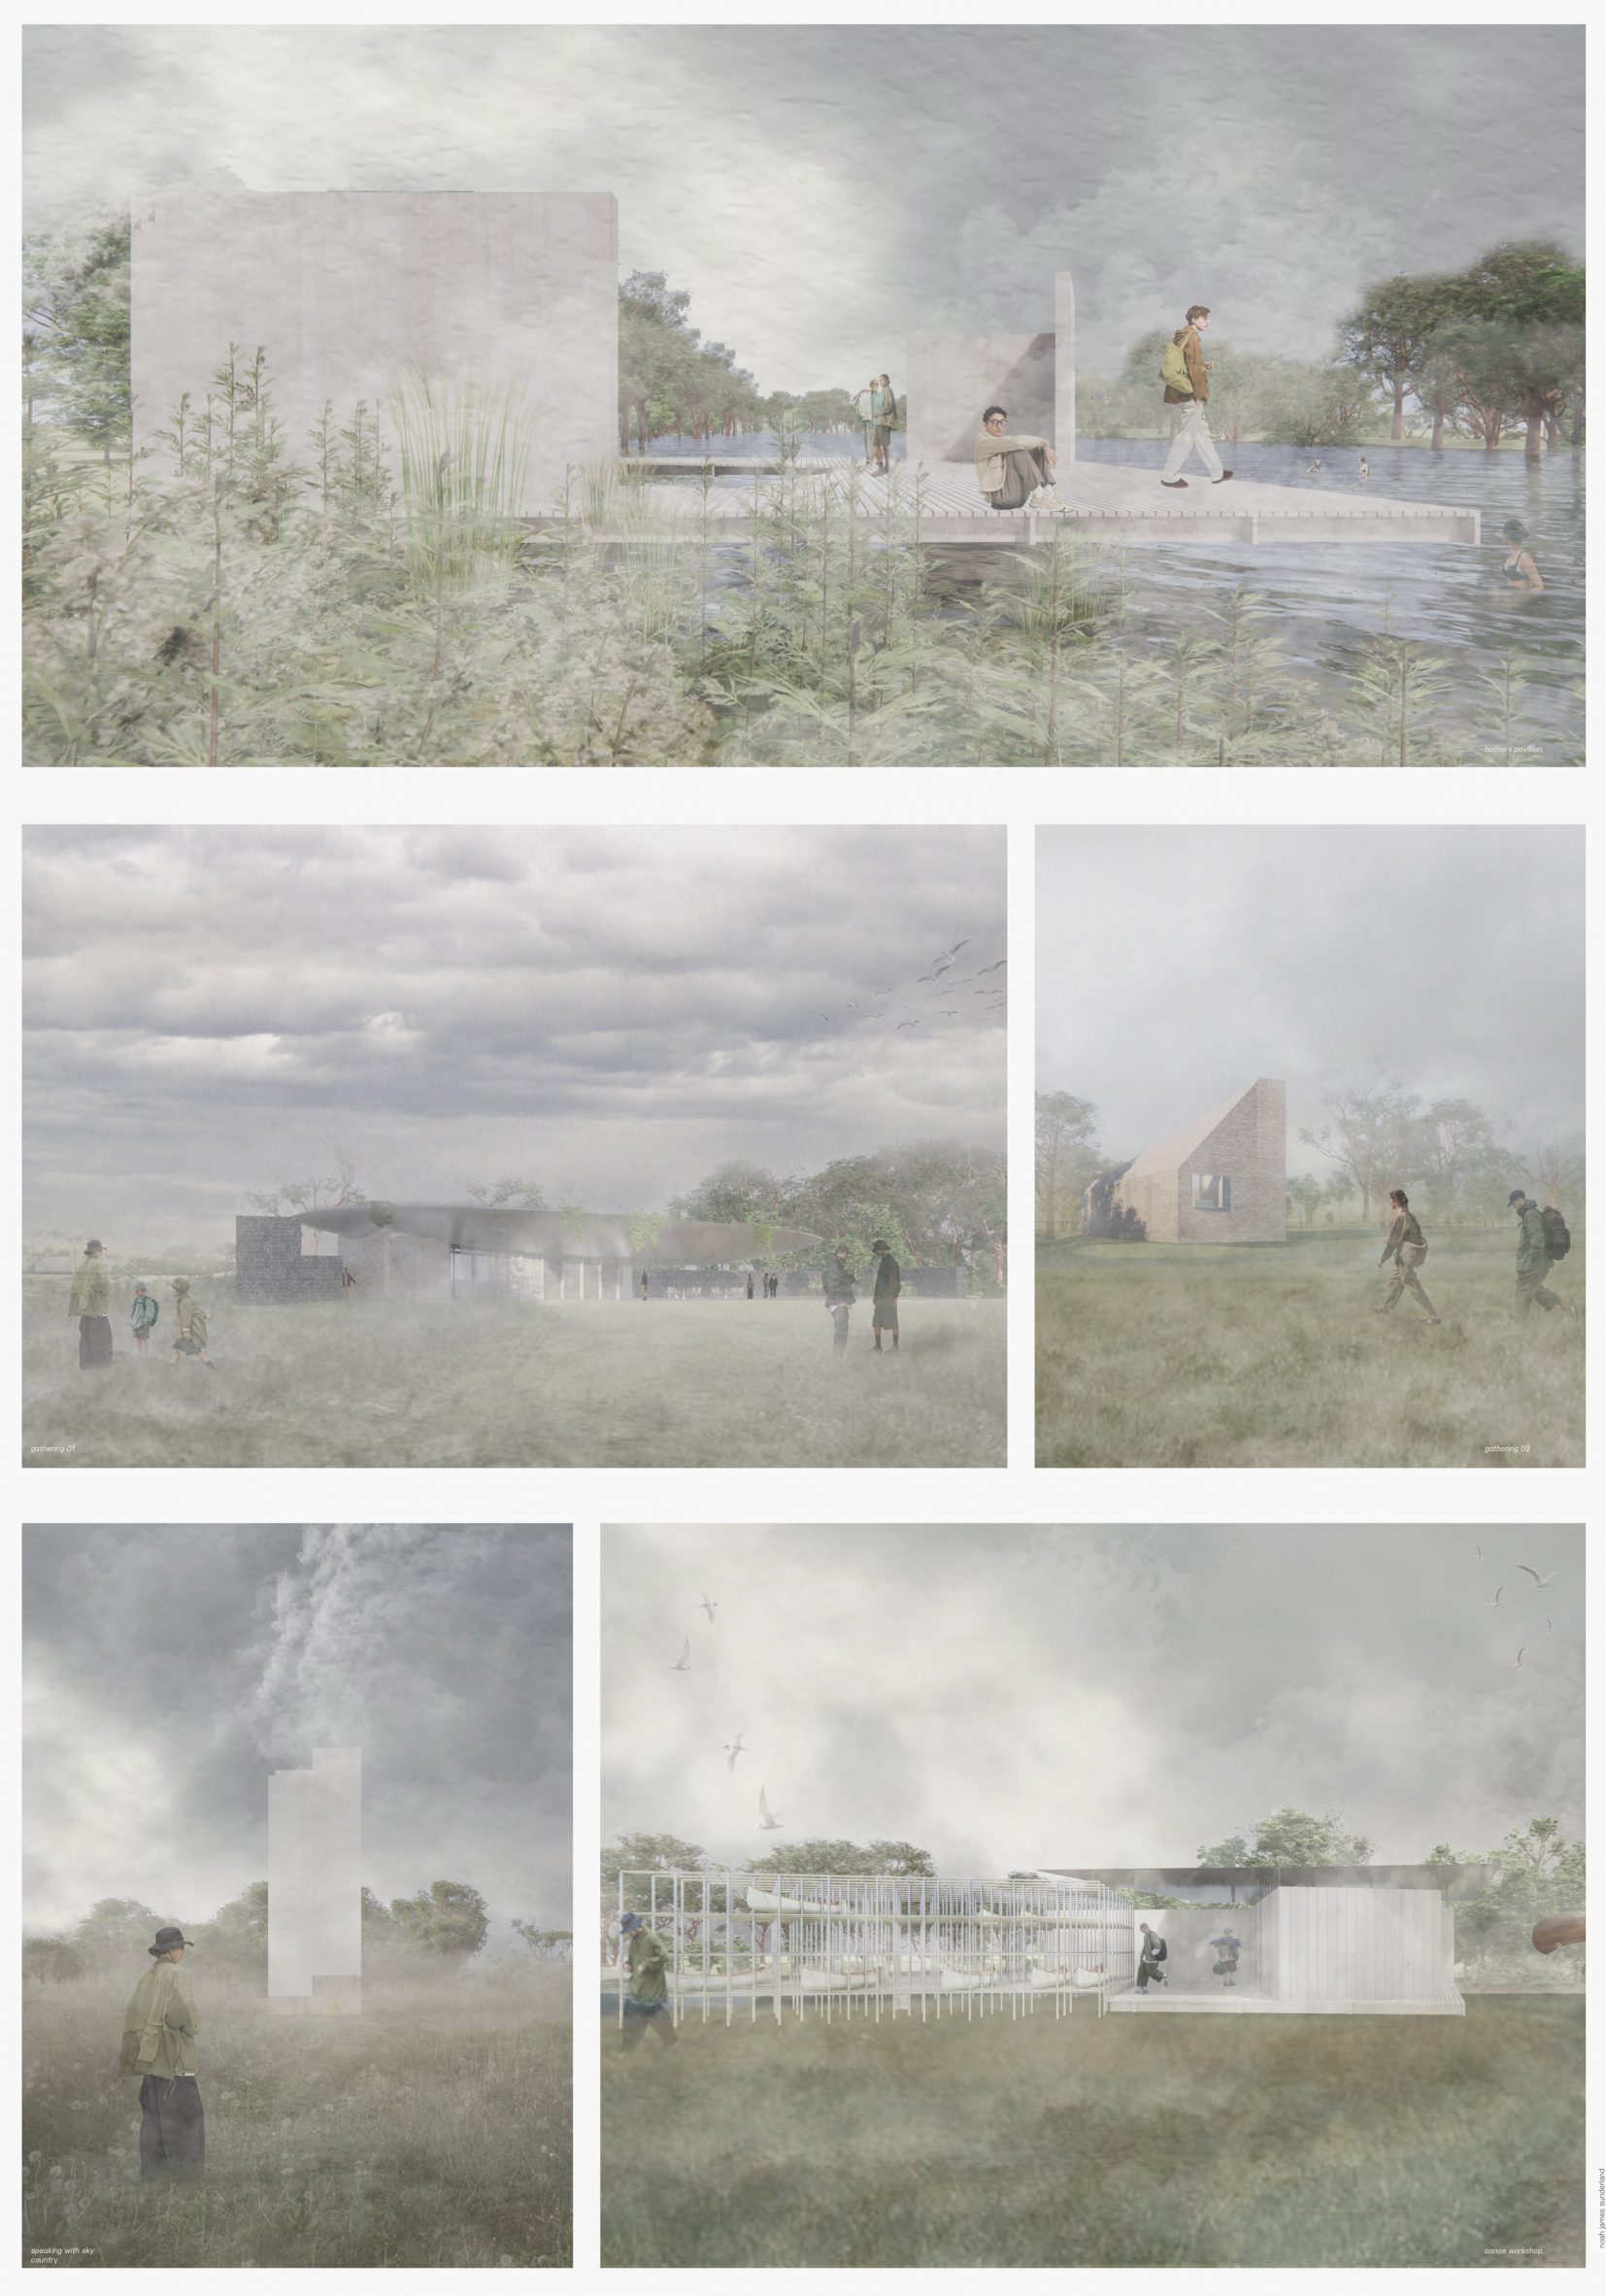 Visualisations showing people in landscapes with buildings